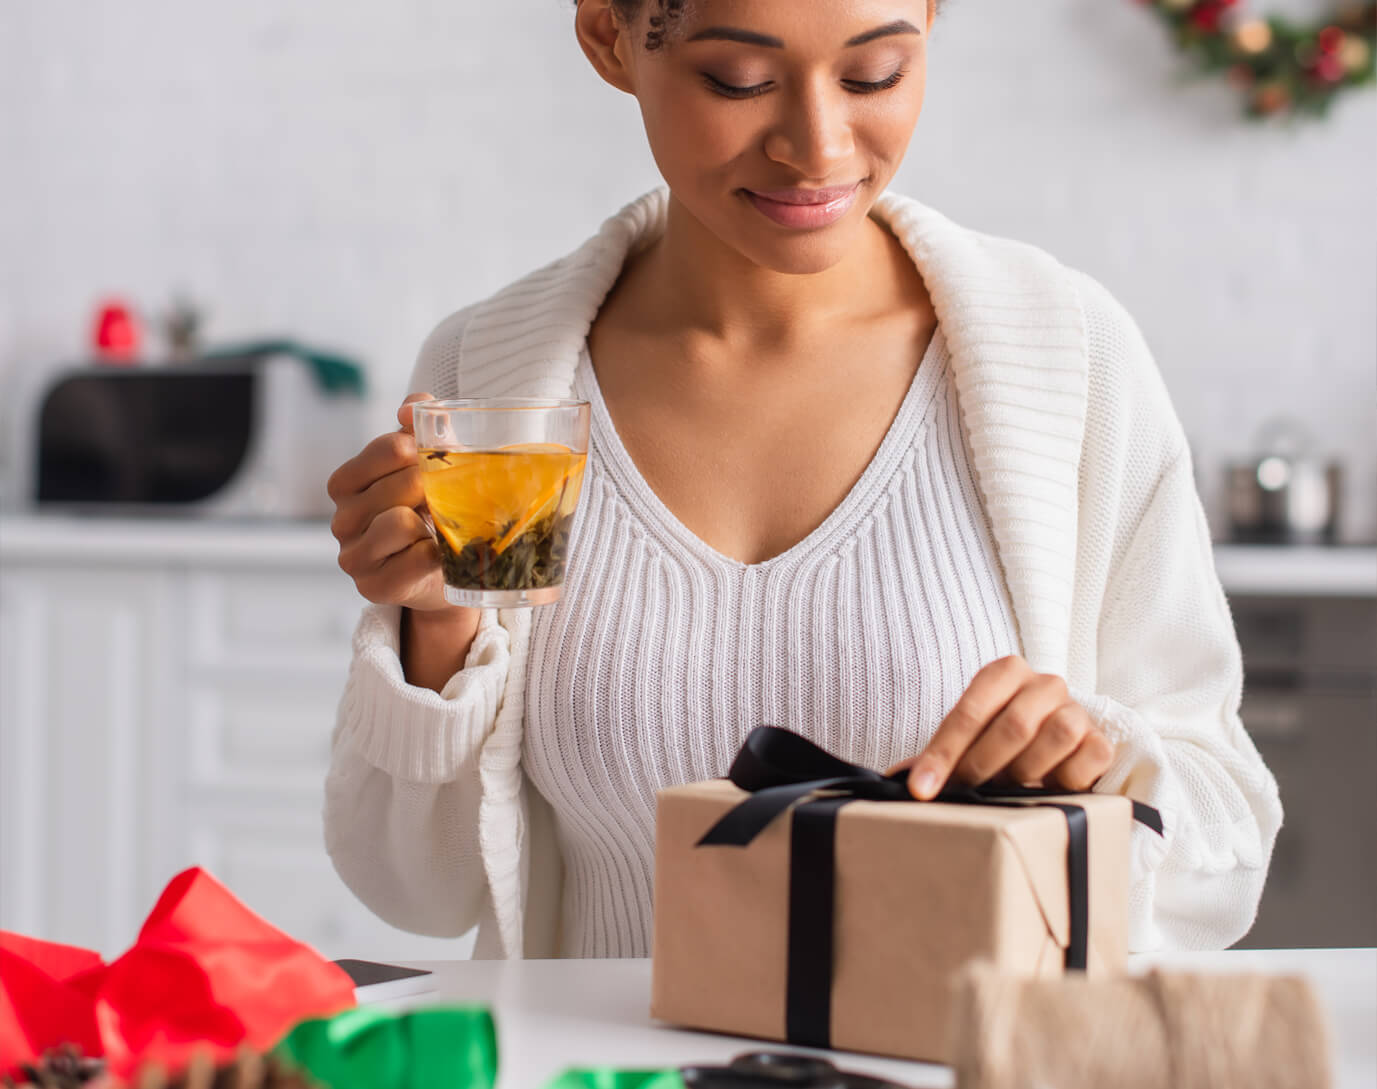 Top 5 Kitchen Accessory Gifts This Christmas 